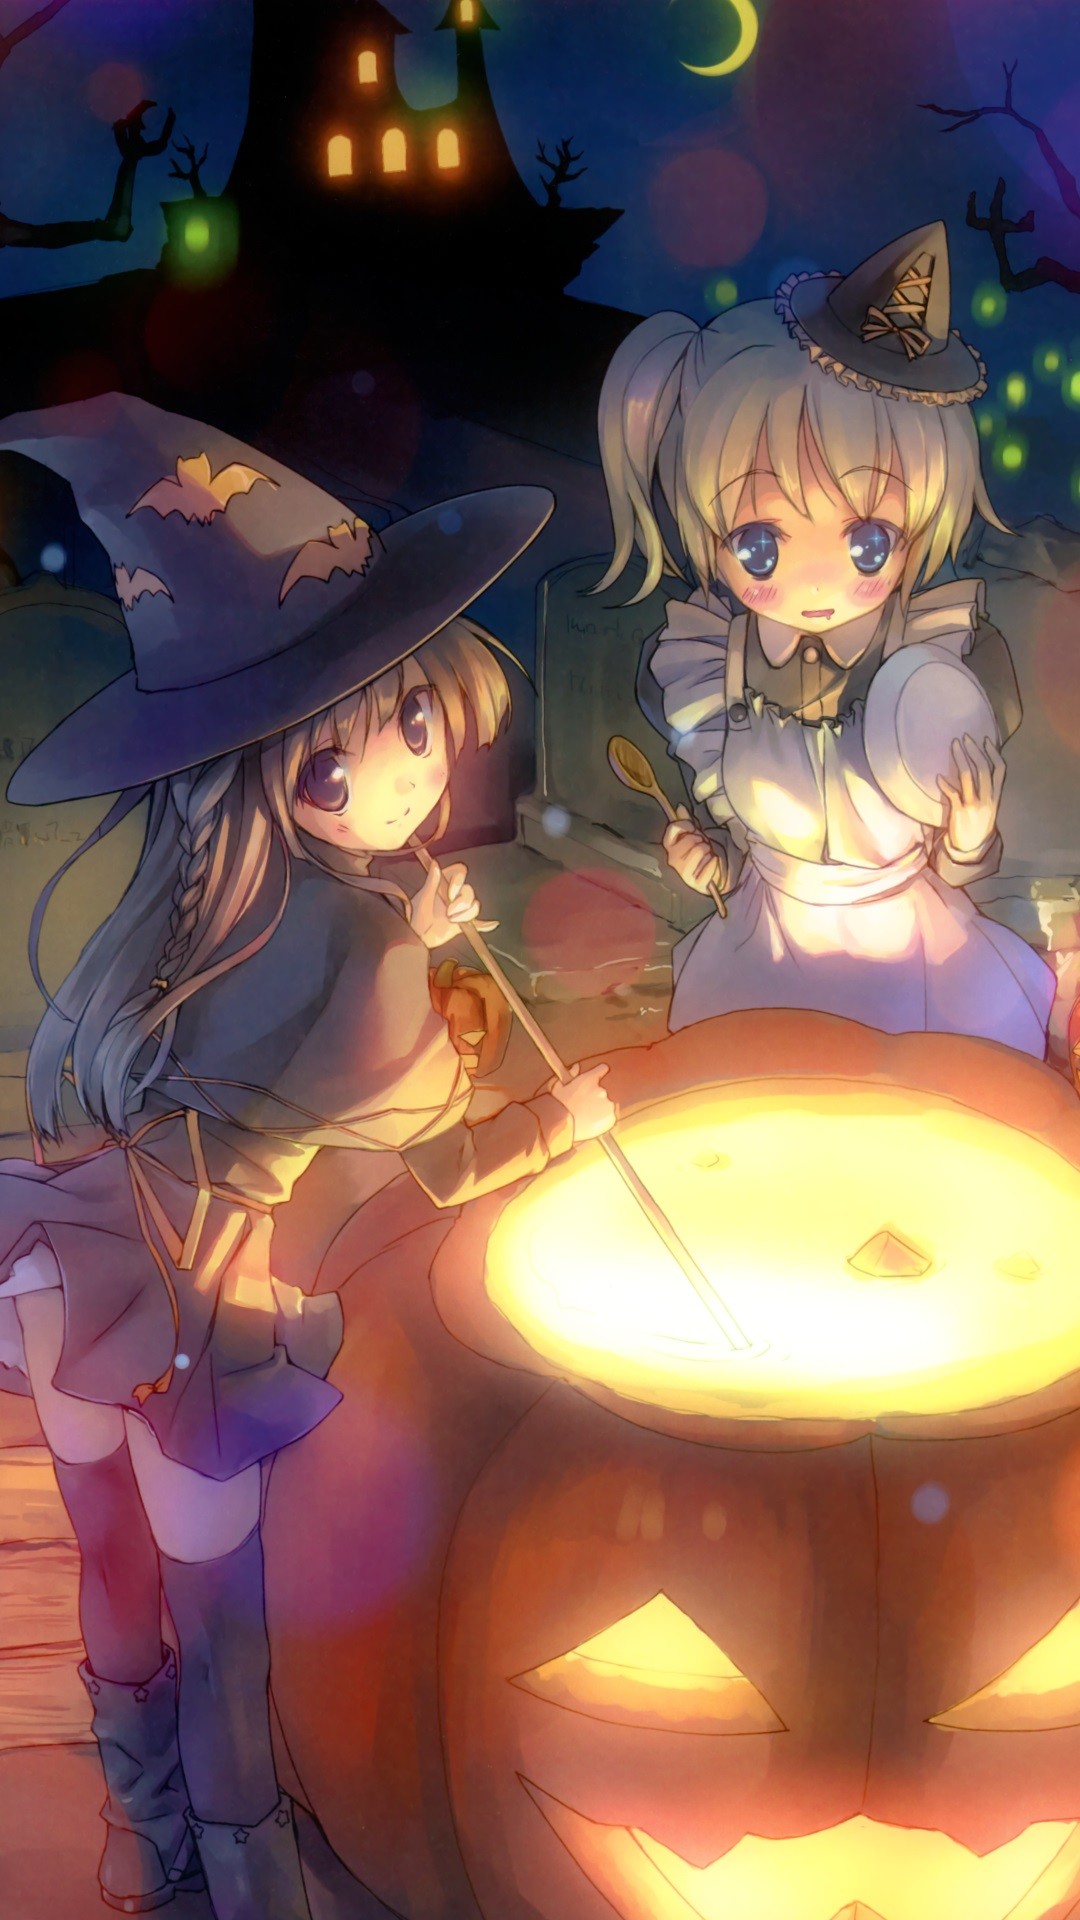 Aesthetic Anime Halloween Wallpapers - Wallpaper Cave